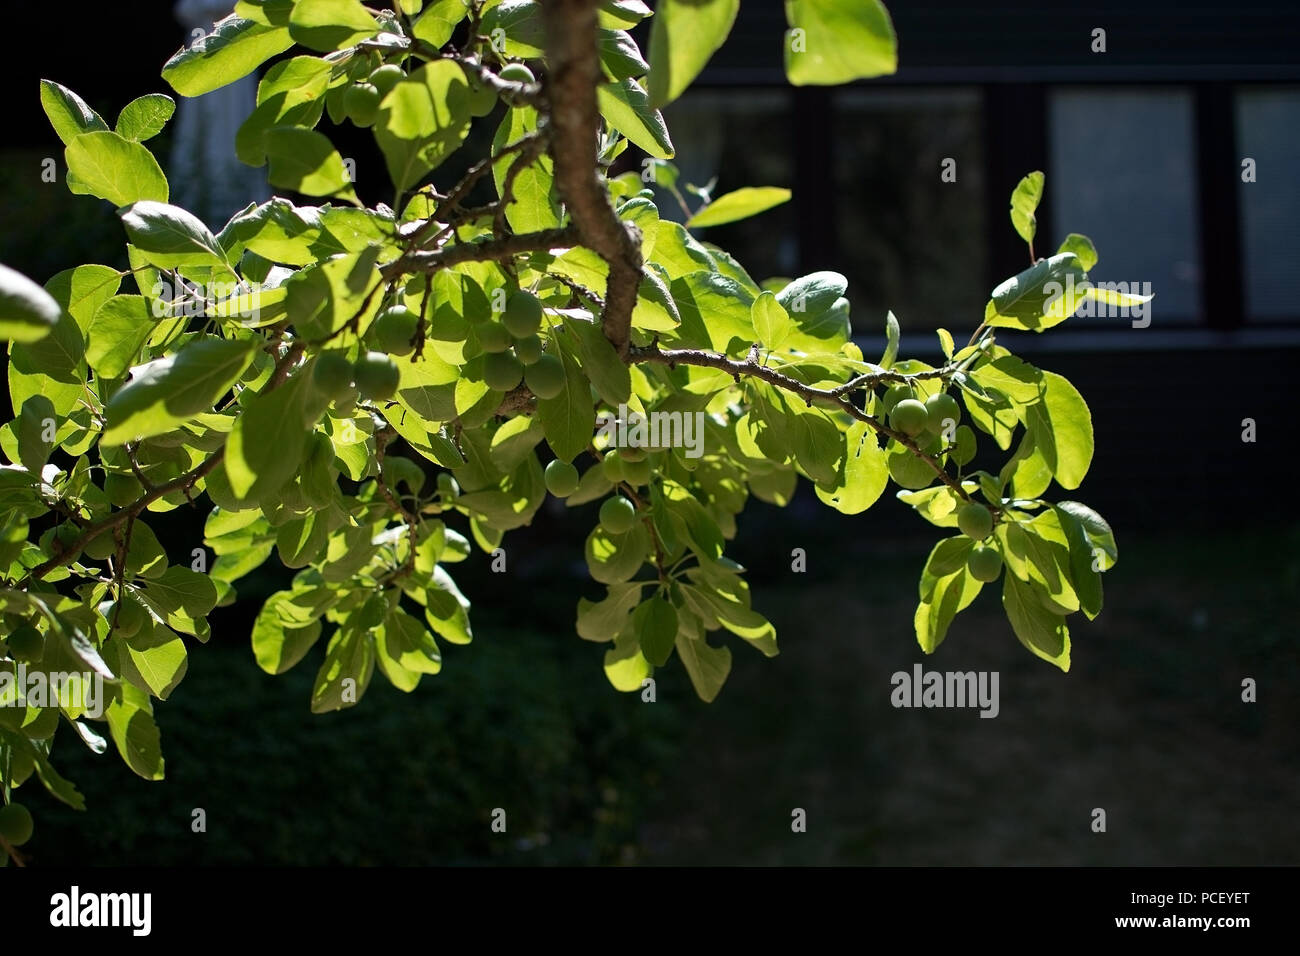 Plum tree green leafy branches closeup in a garden in Sweden in July Stock Photo